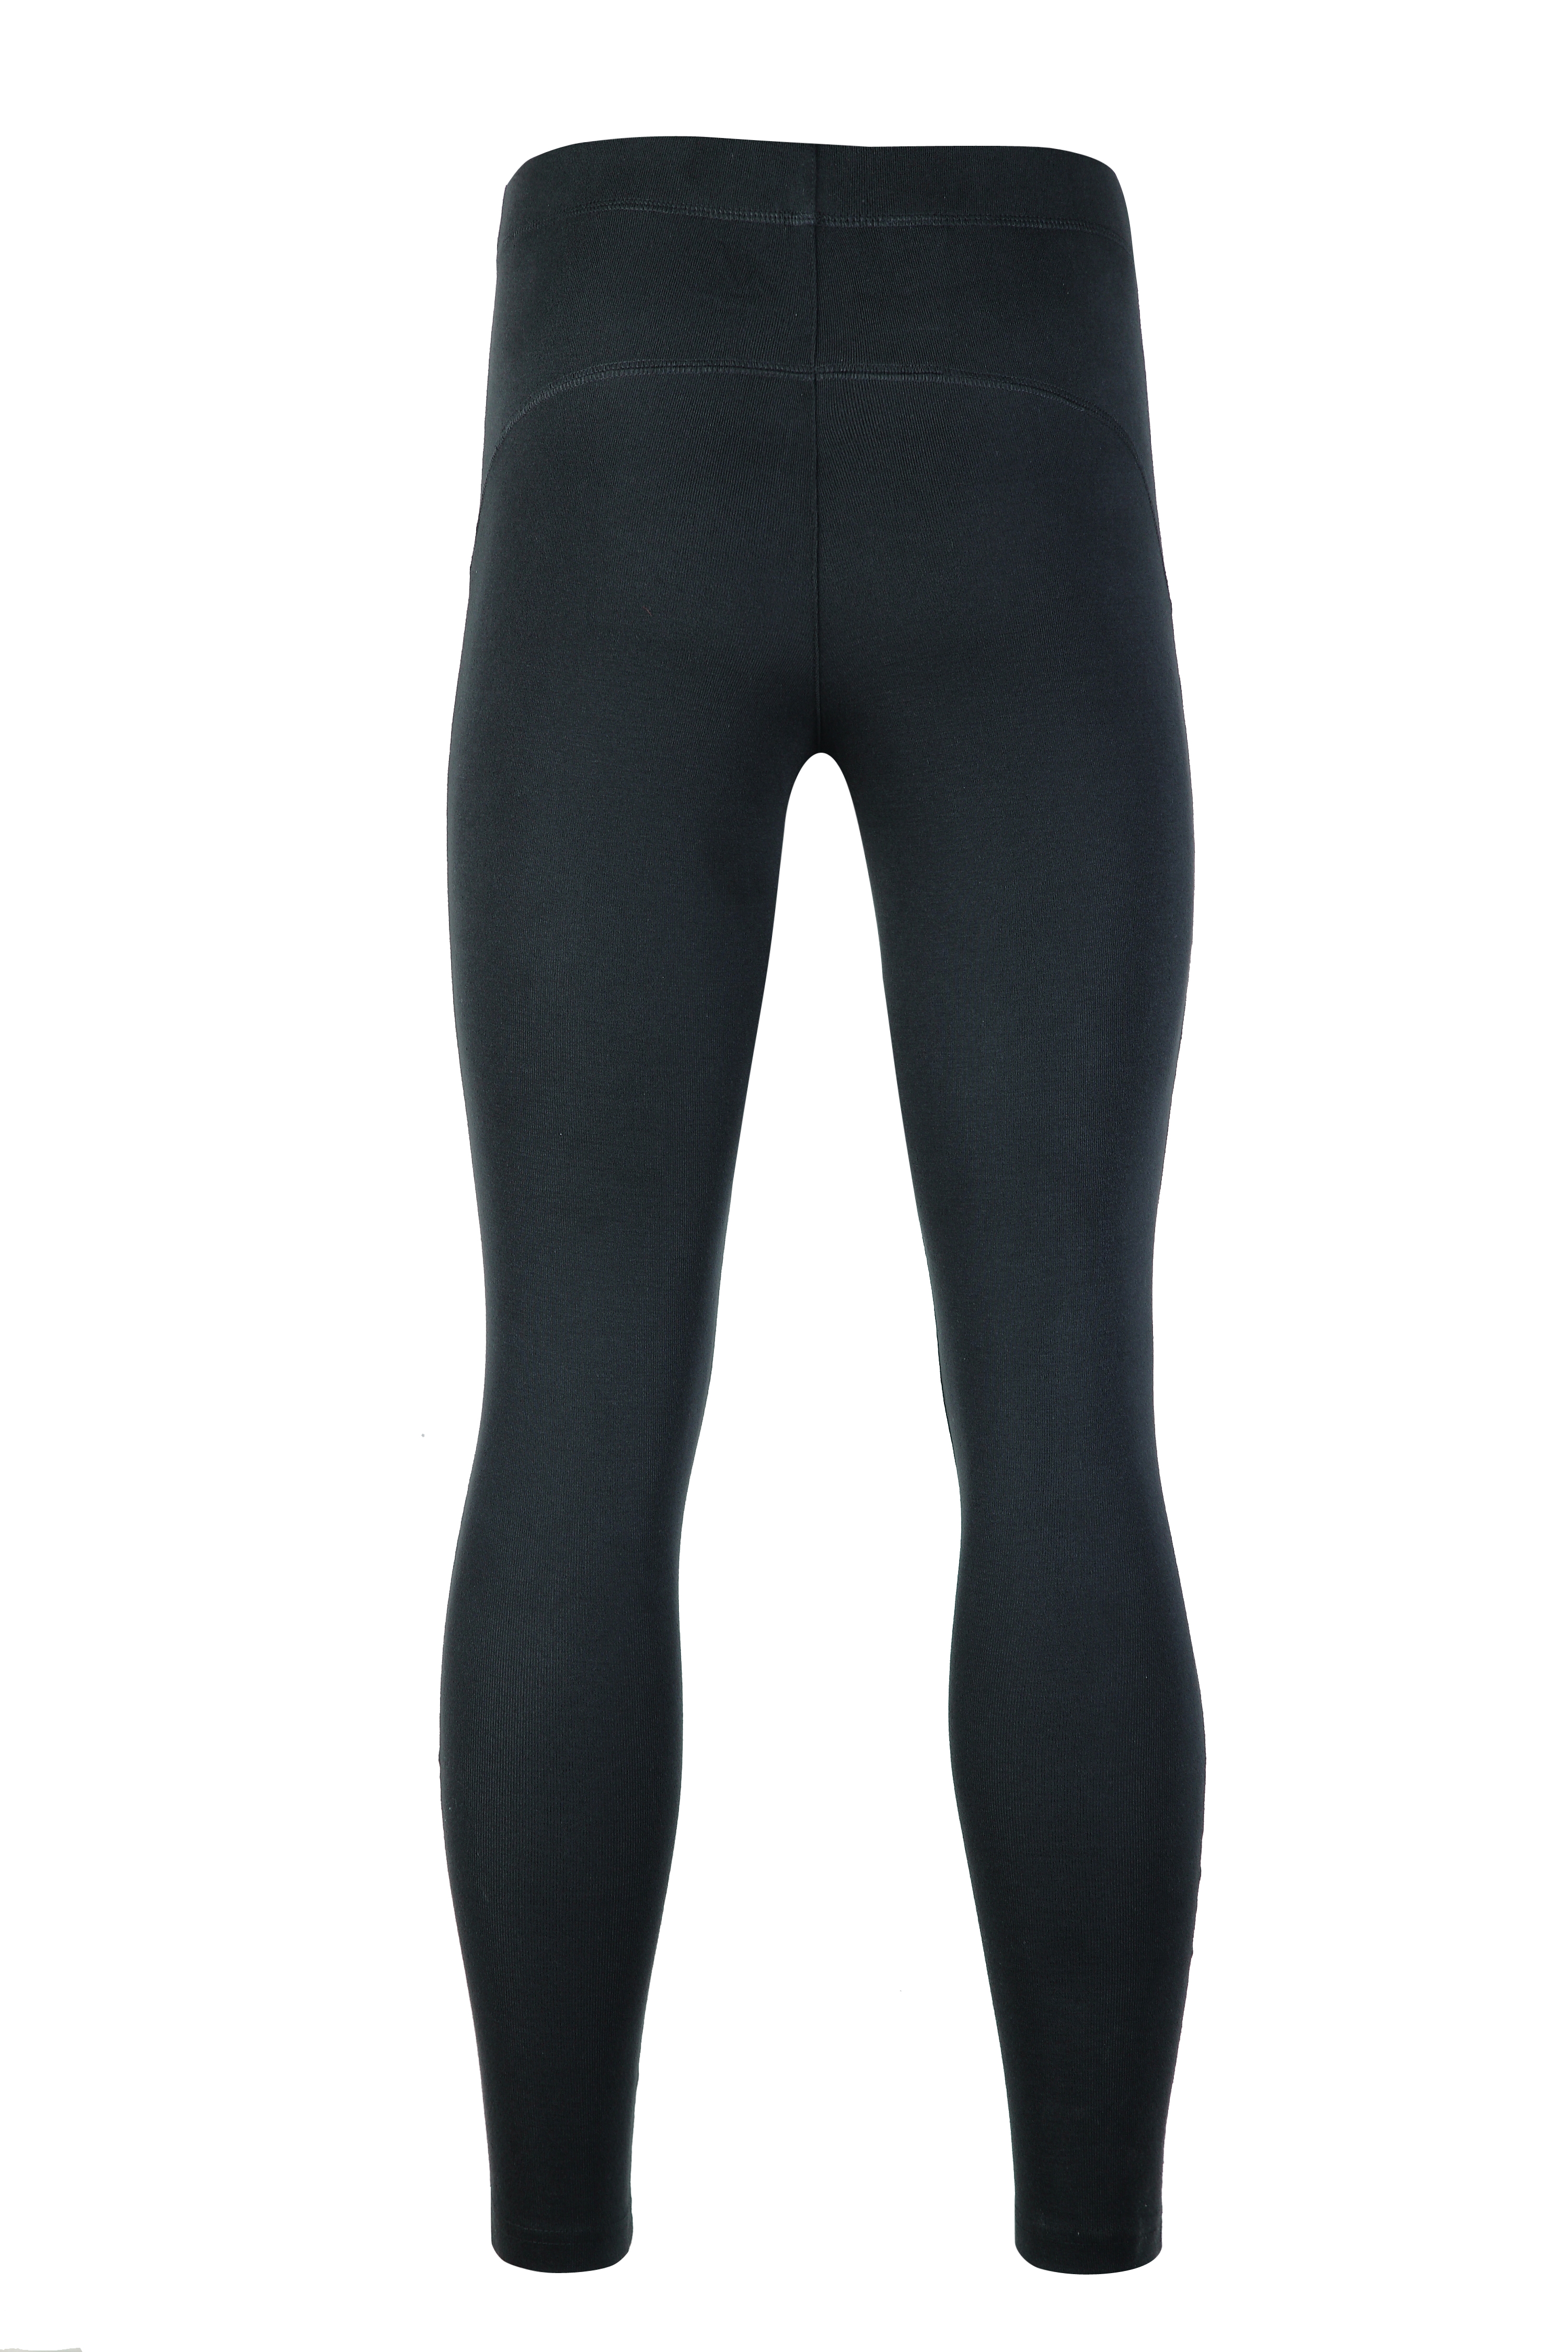 Men’s knitted compression pants.